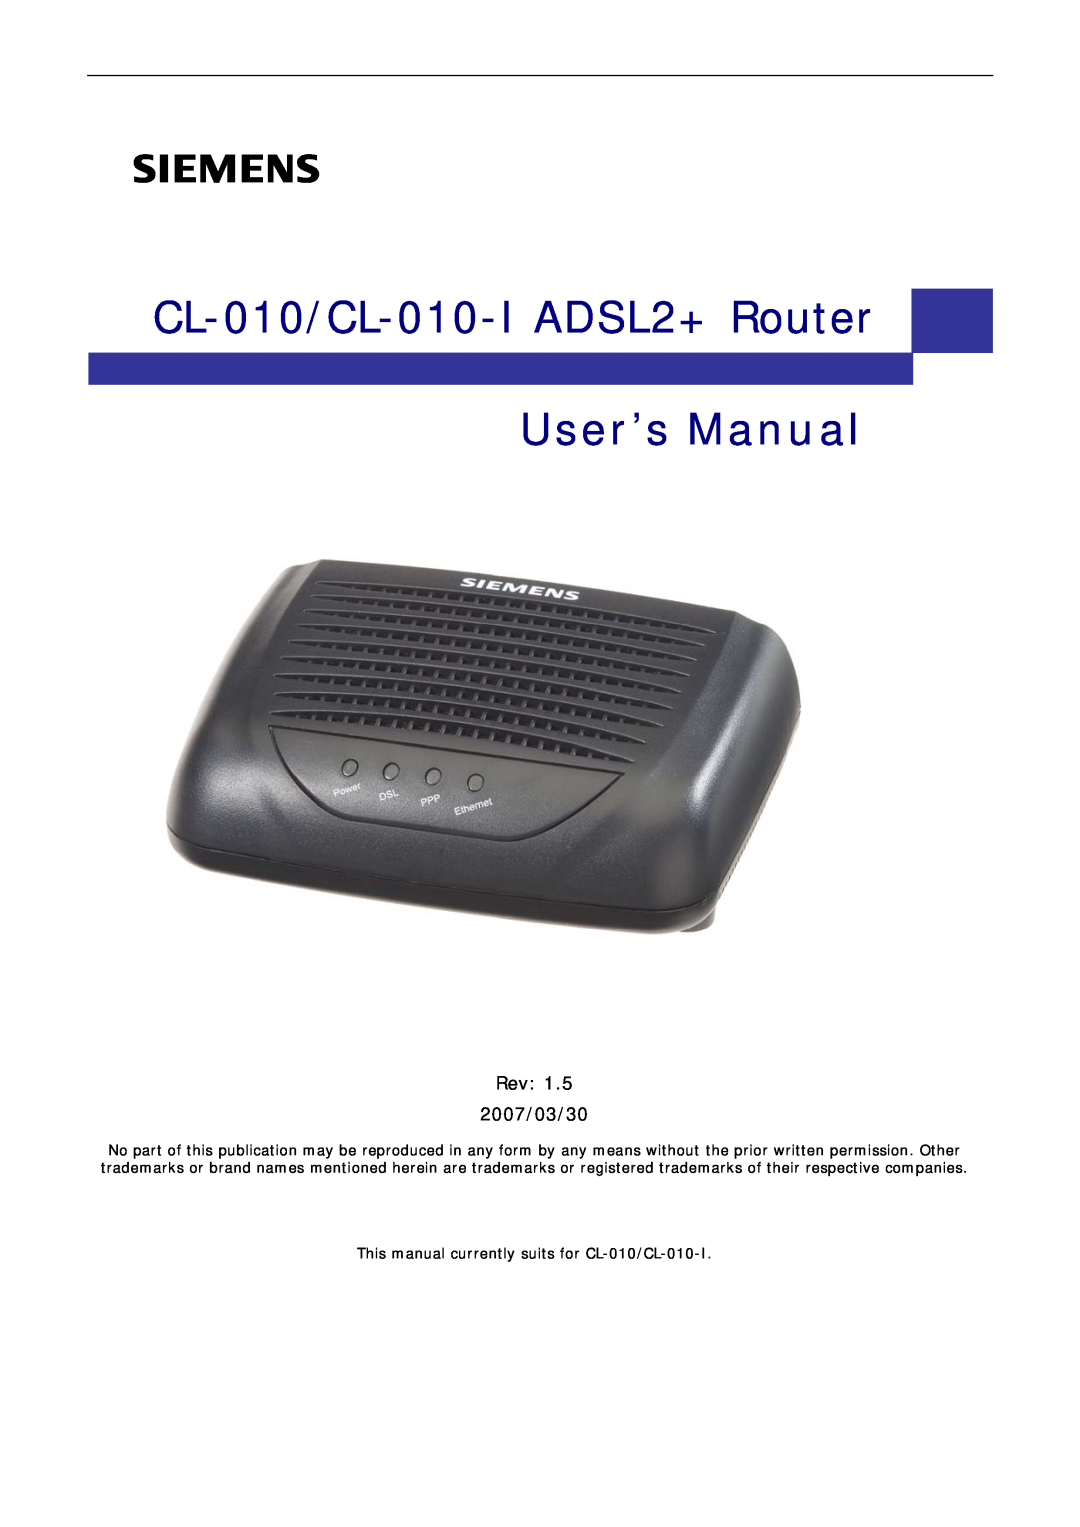 Siemens manual User’s Manual, CL-010/CL-010-I ADSL2+ Router, This manual currently suits for CL-010/CL-010-I 